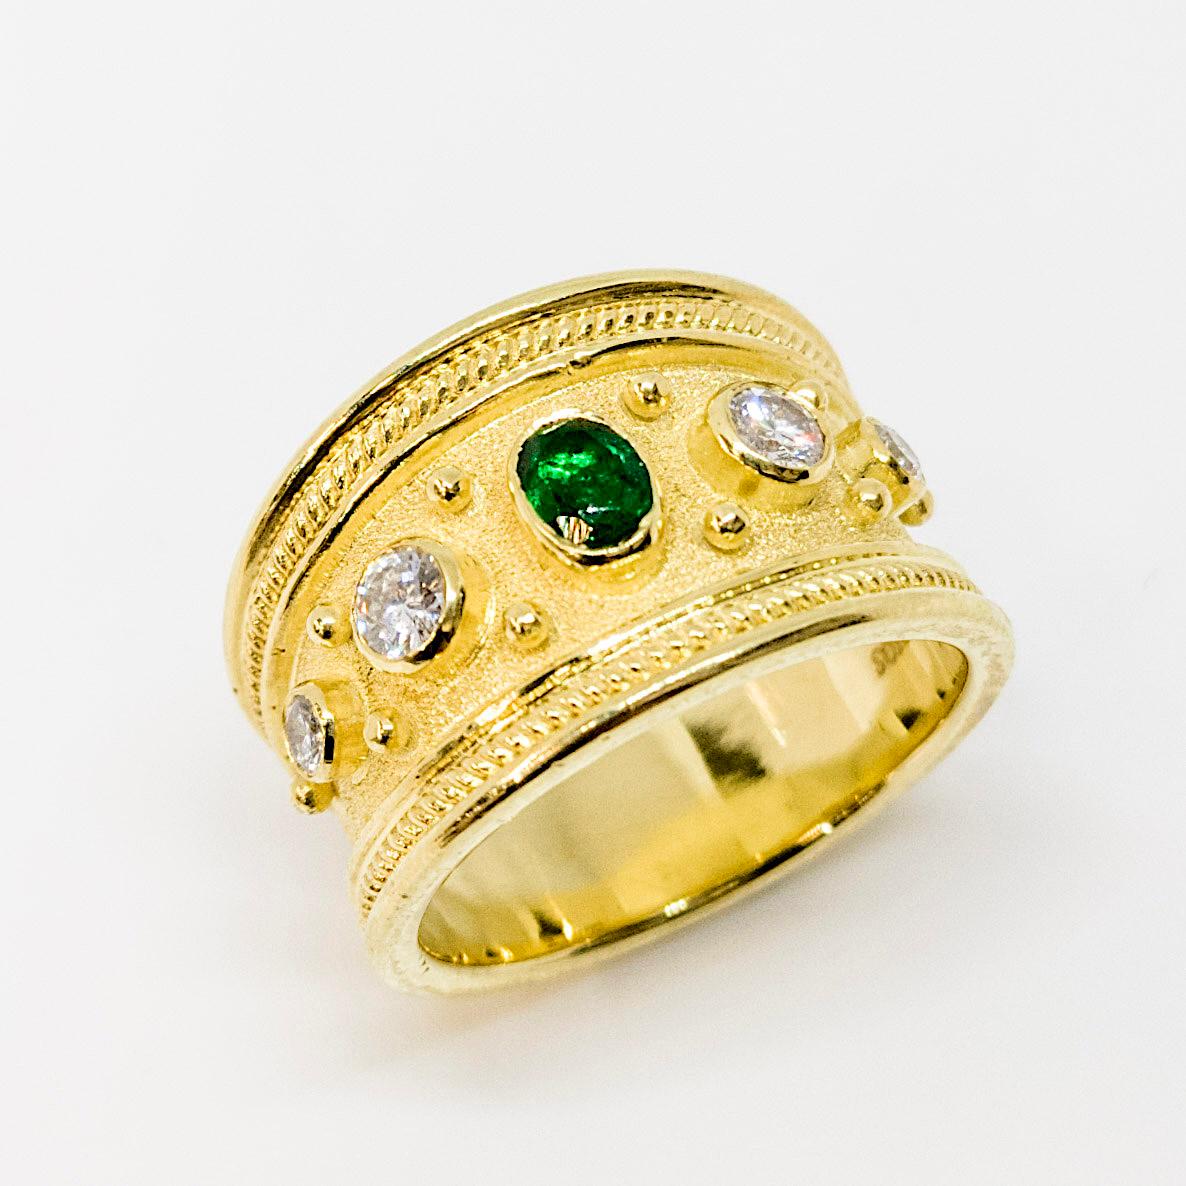 This is a stunning S.Georgios designer Ring in Yellow Gold 18 Karat all decorated with a Byzantine velvet background and granulation details - twisted wires and beads. The center of the ring features a beautiful 0.23 Carat oval cut Emerald